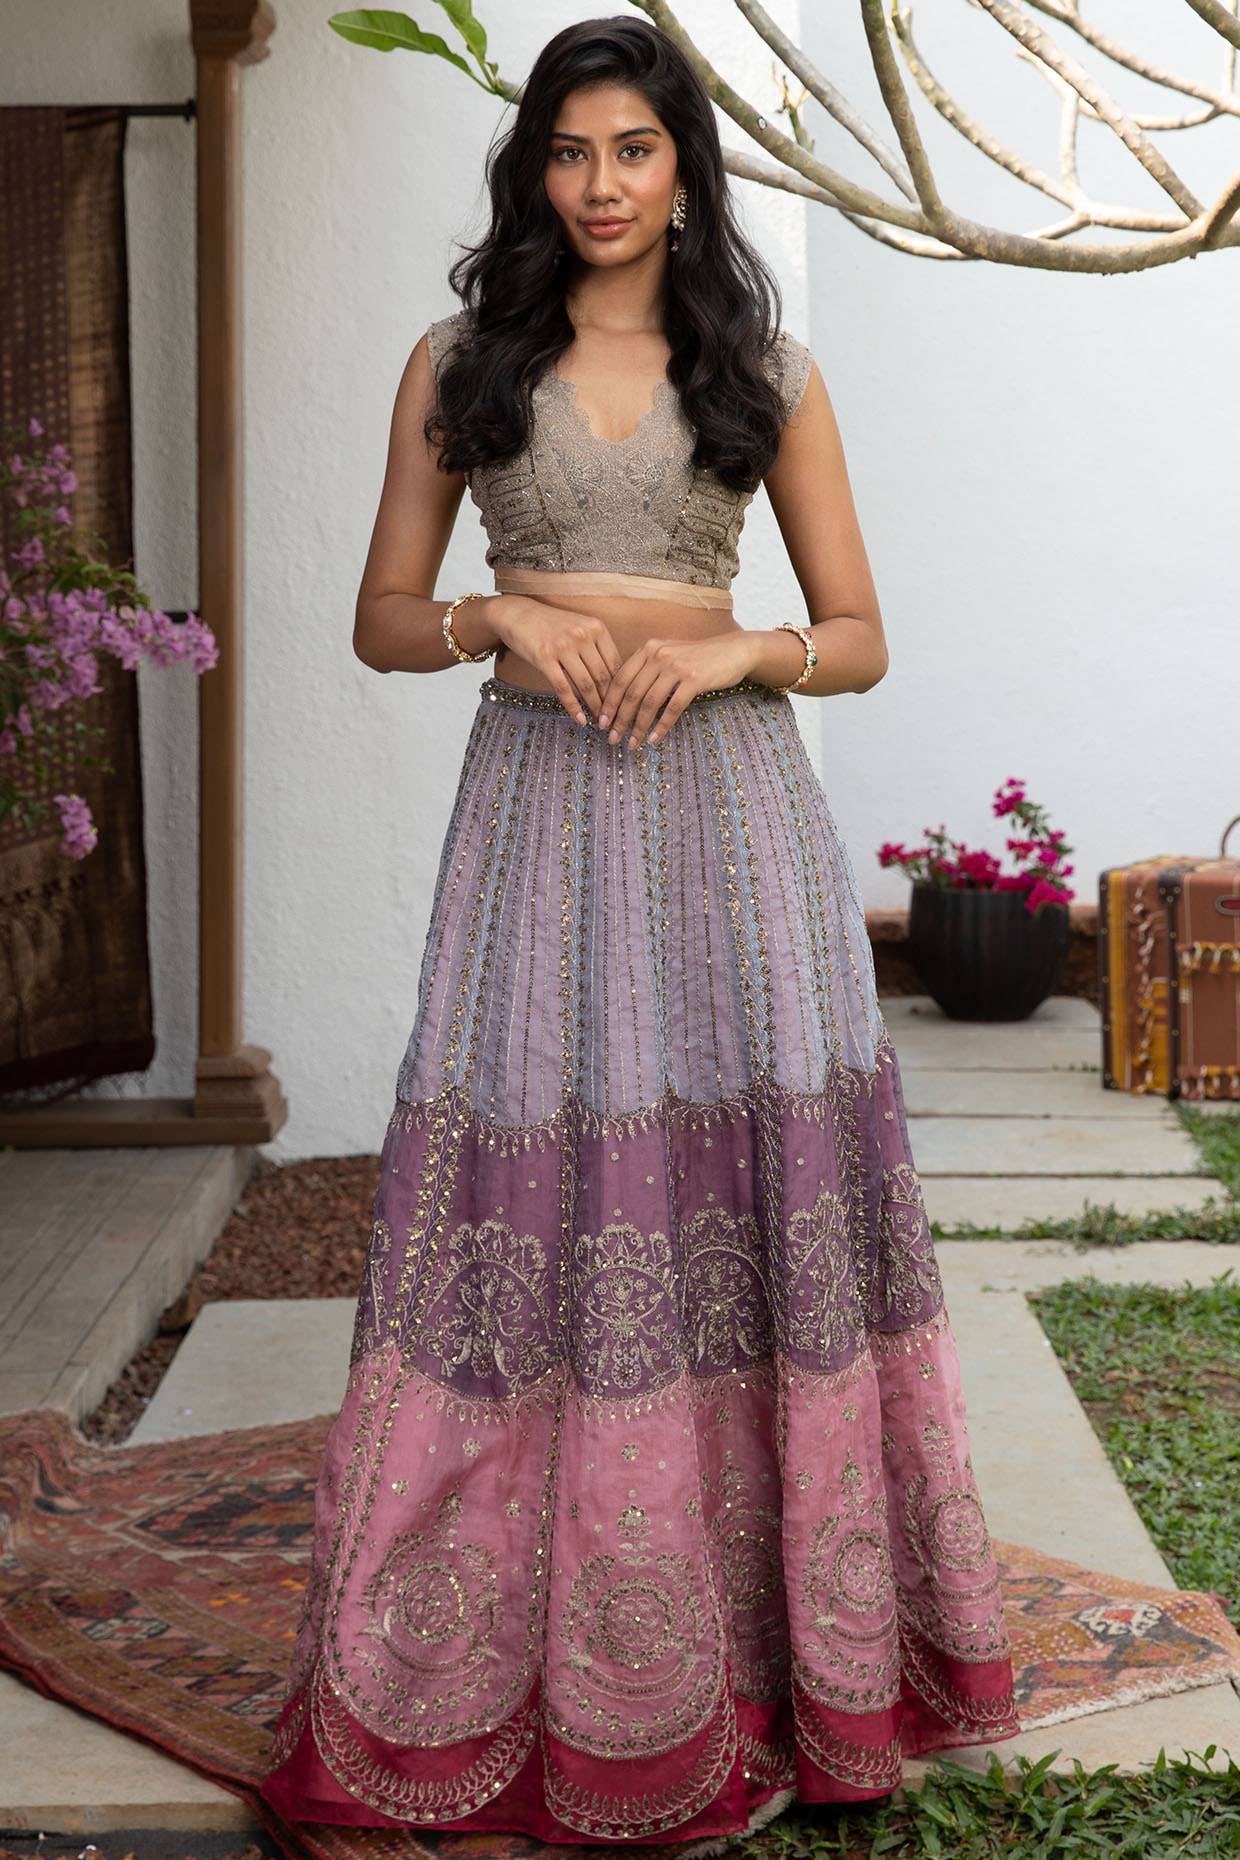 JADE by Monica & Karishma's 'Shubhra' presents a refreshing perspective on  bridal dressing